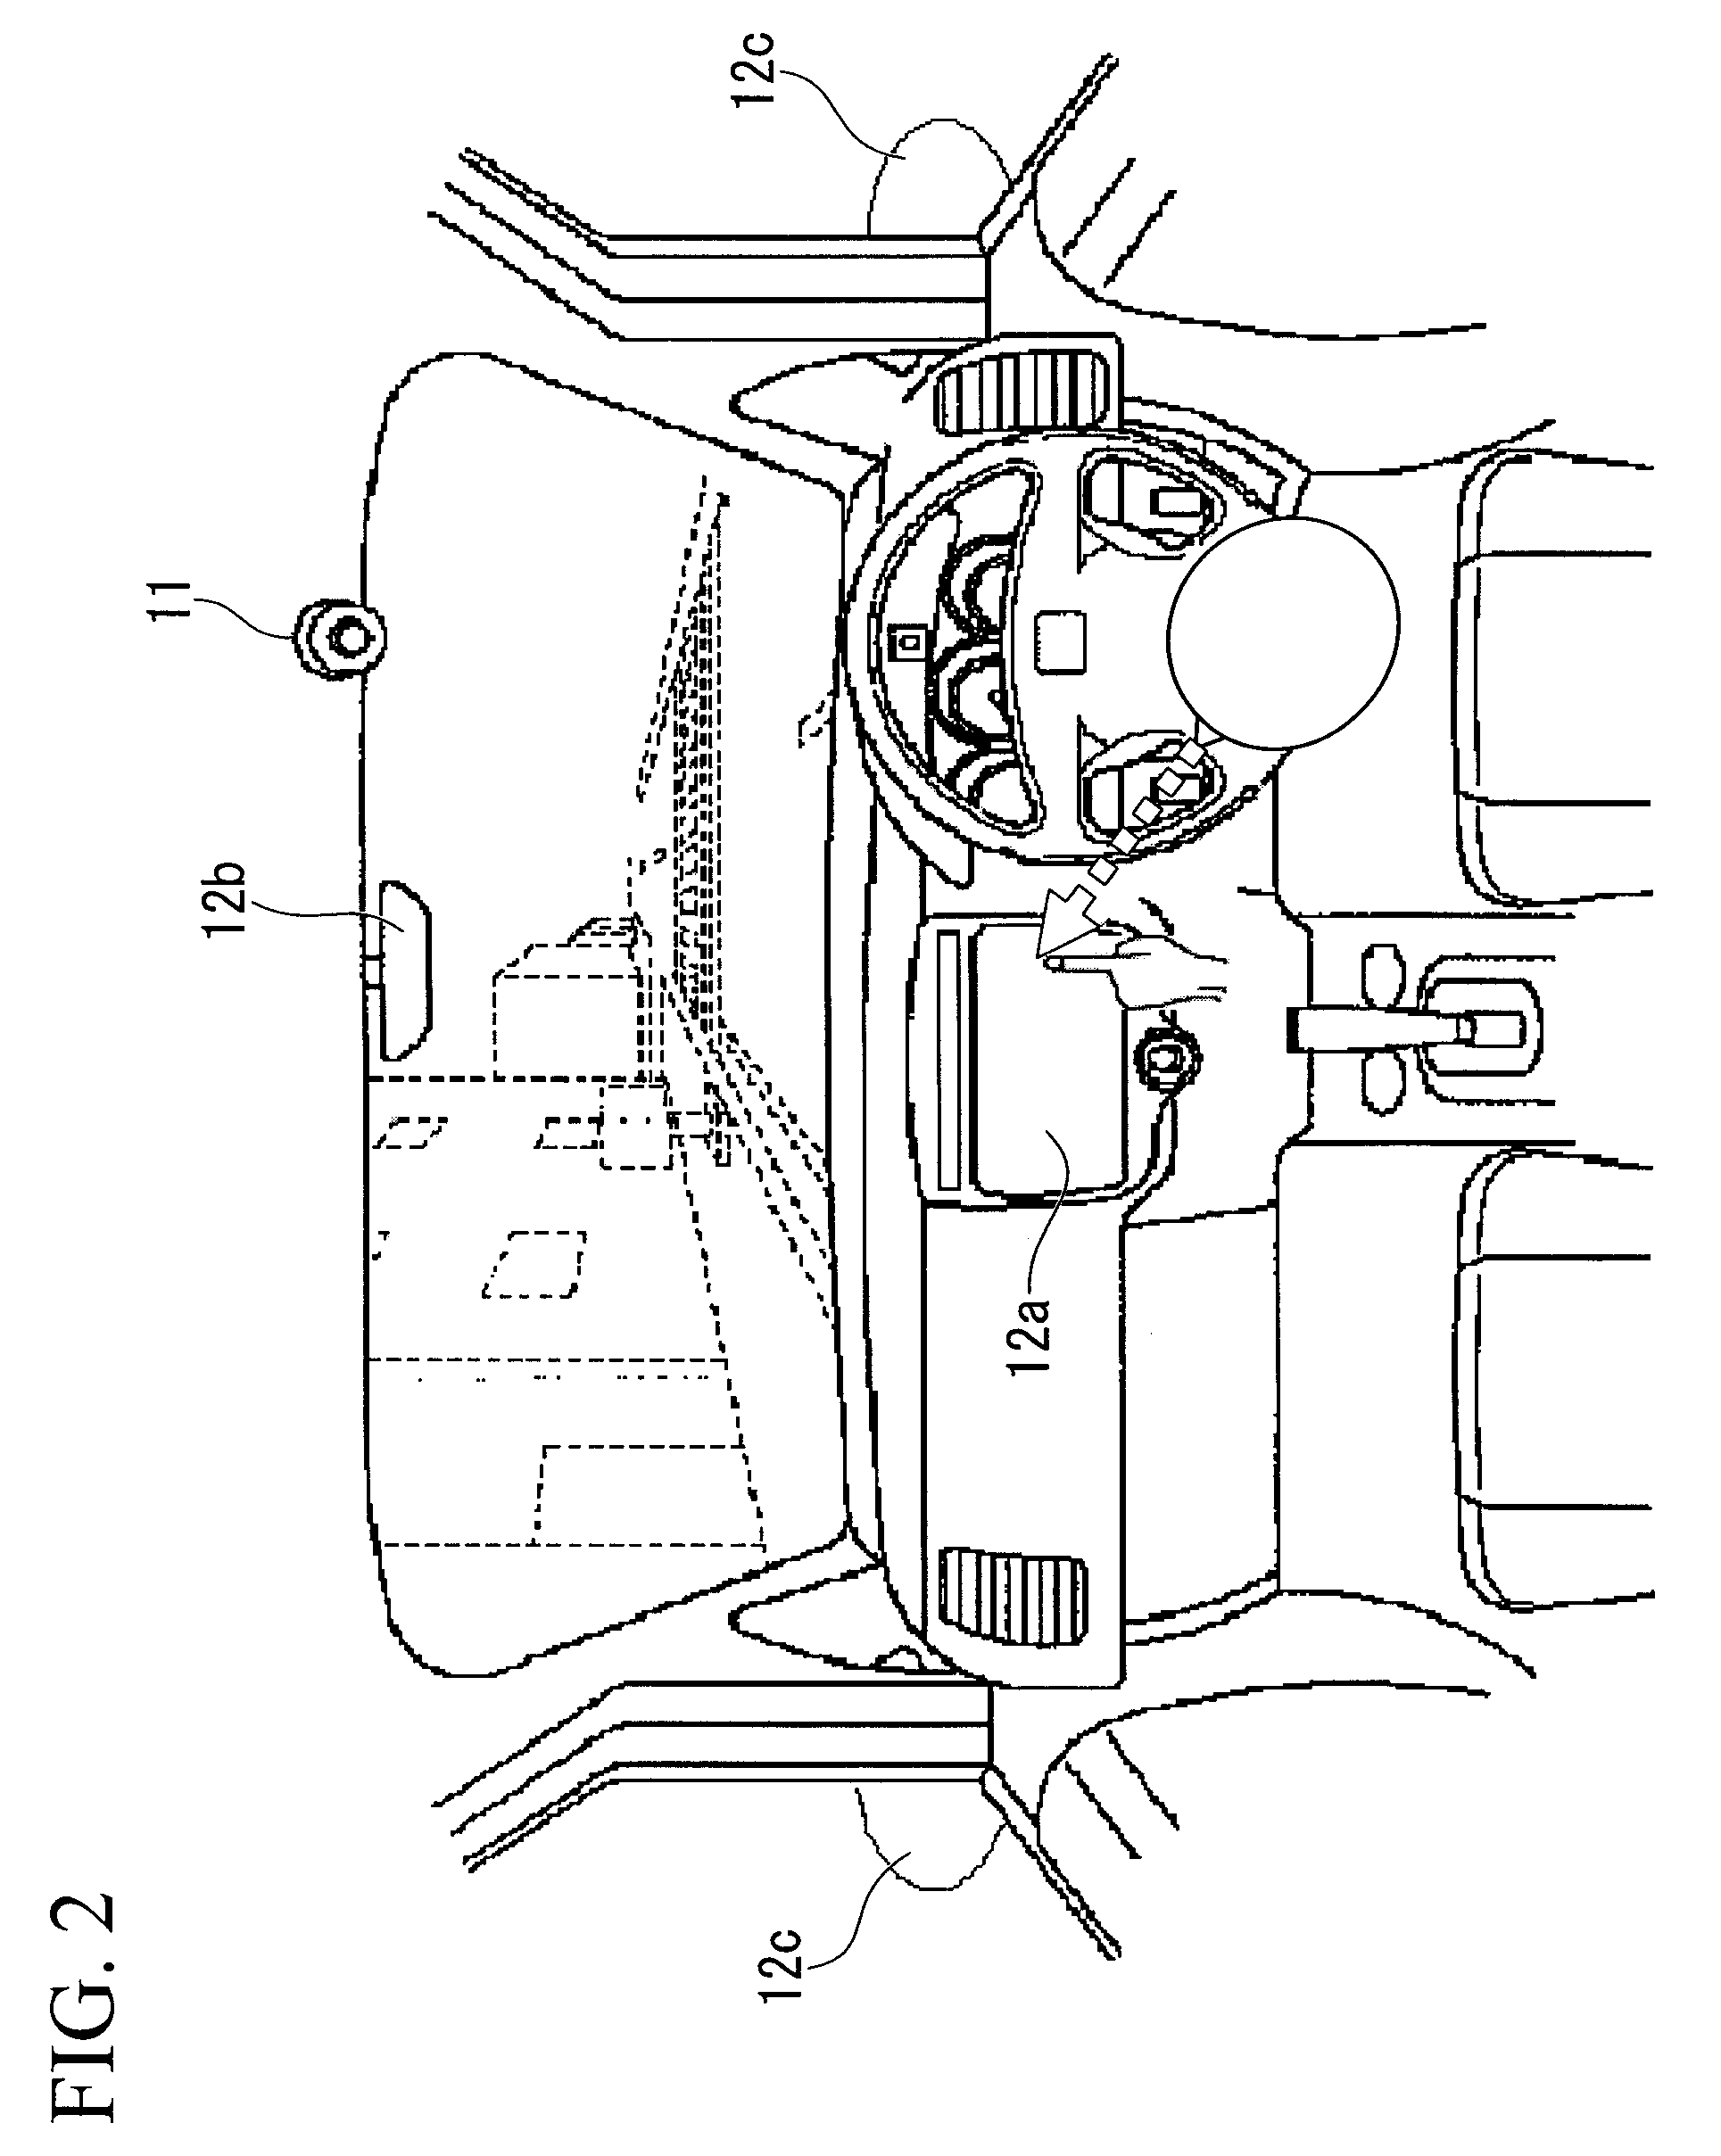 Line of sight detection apparatus